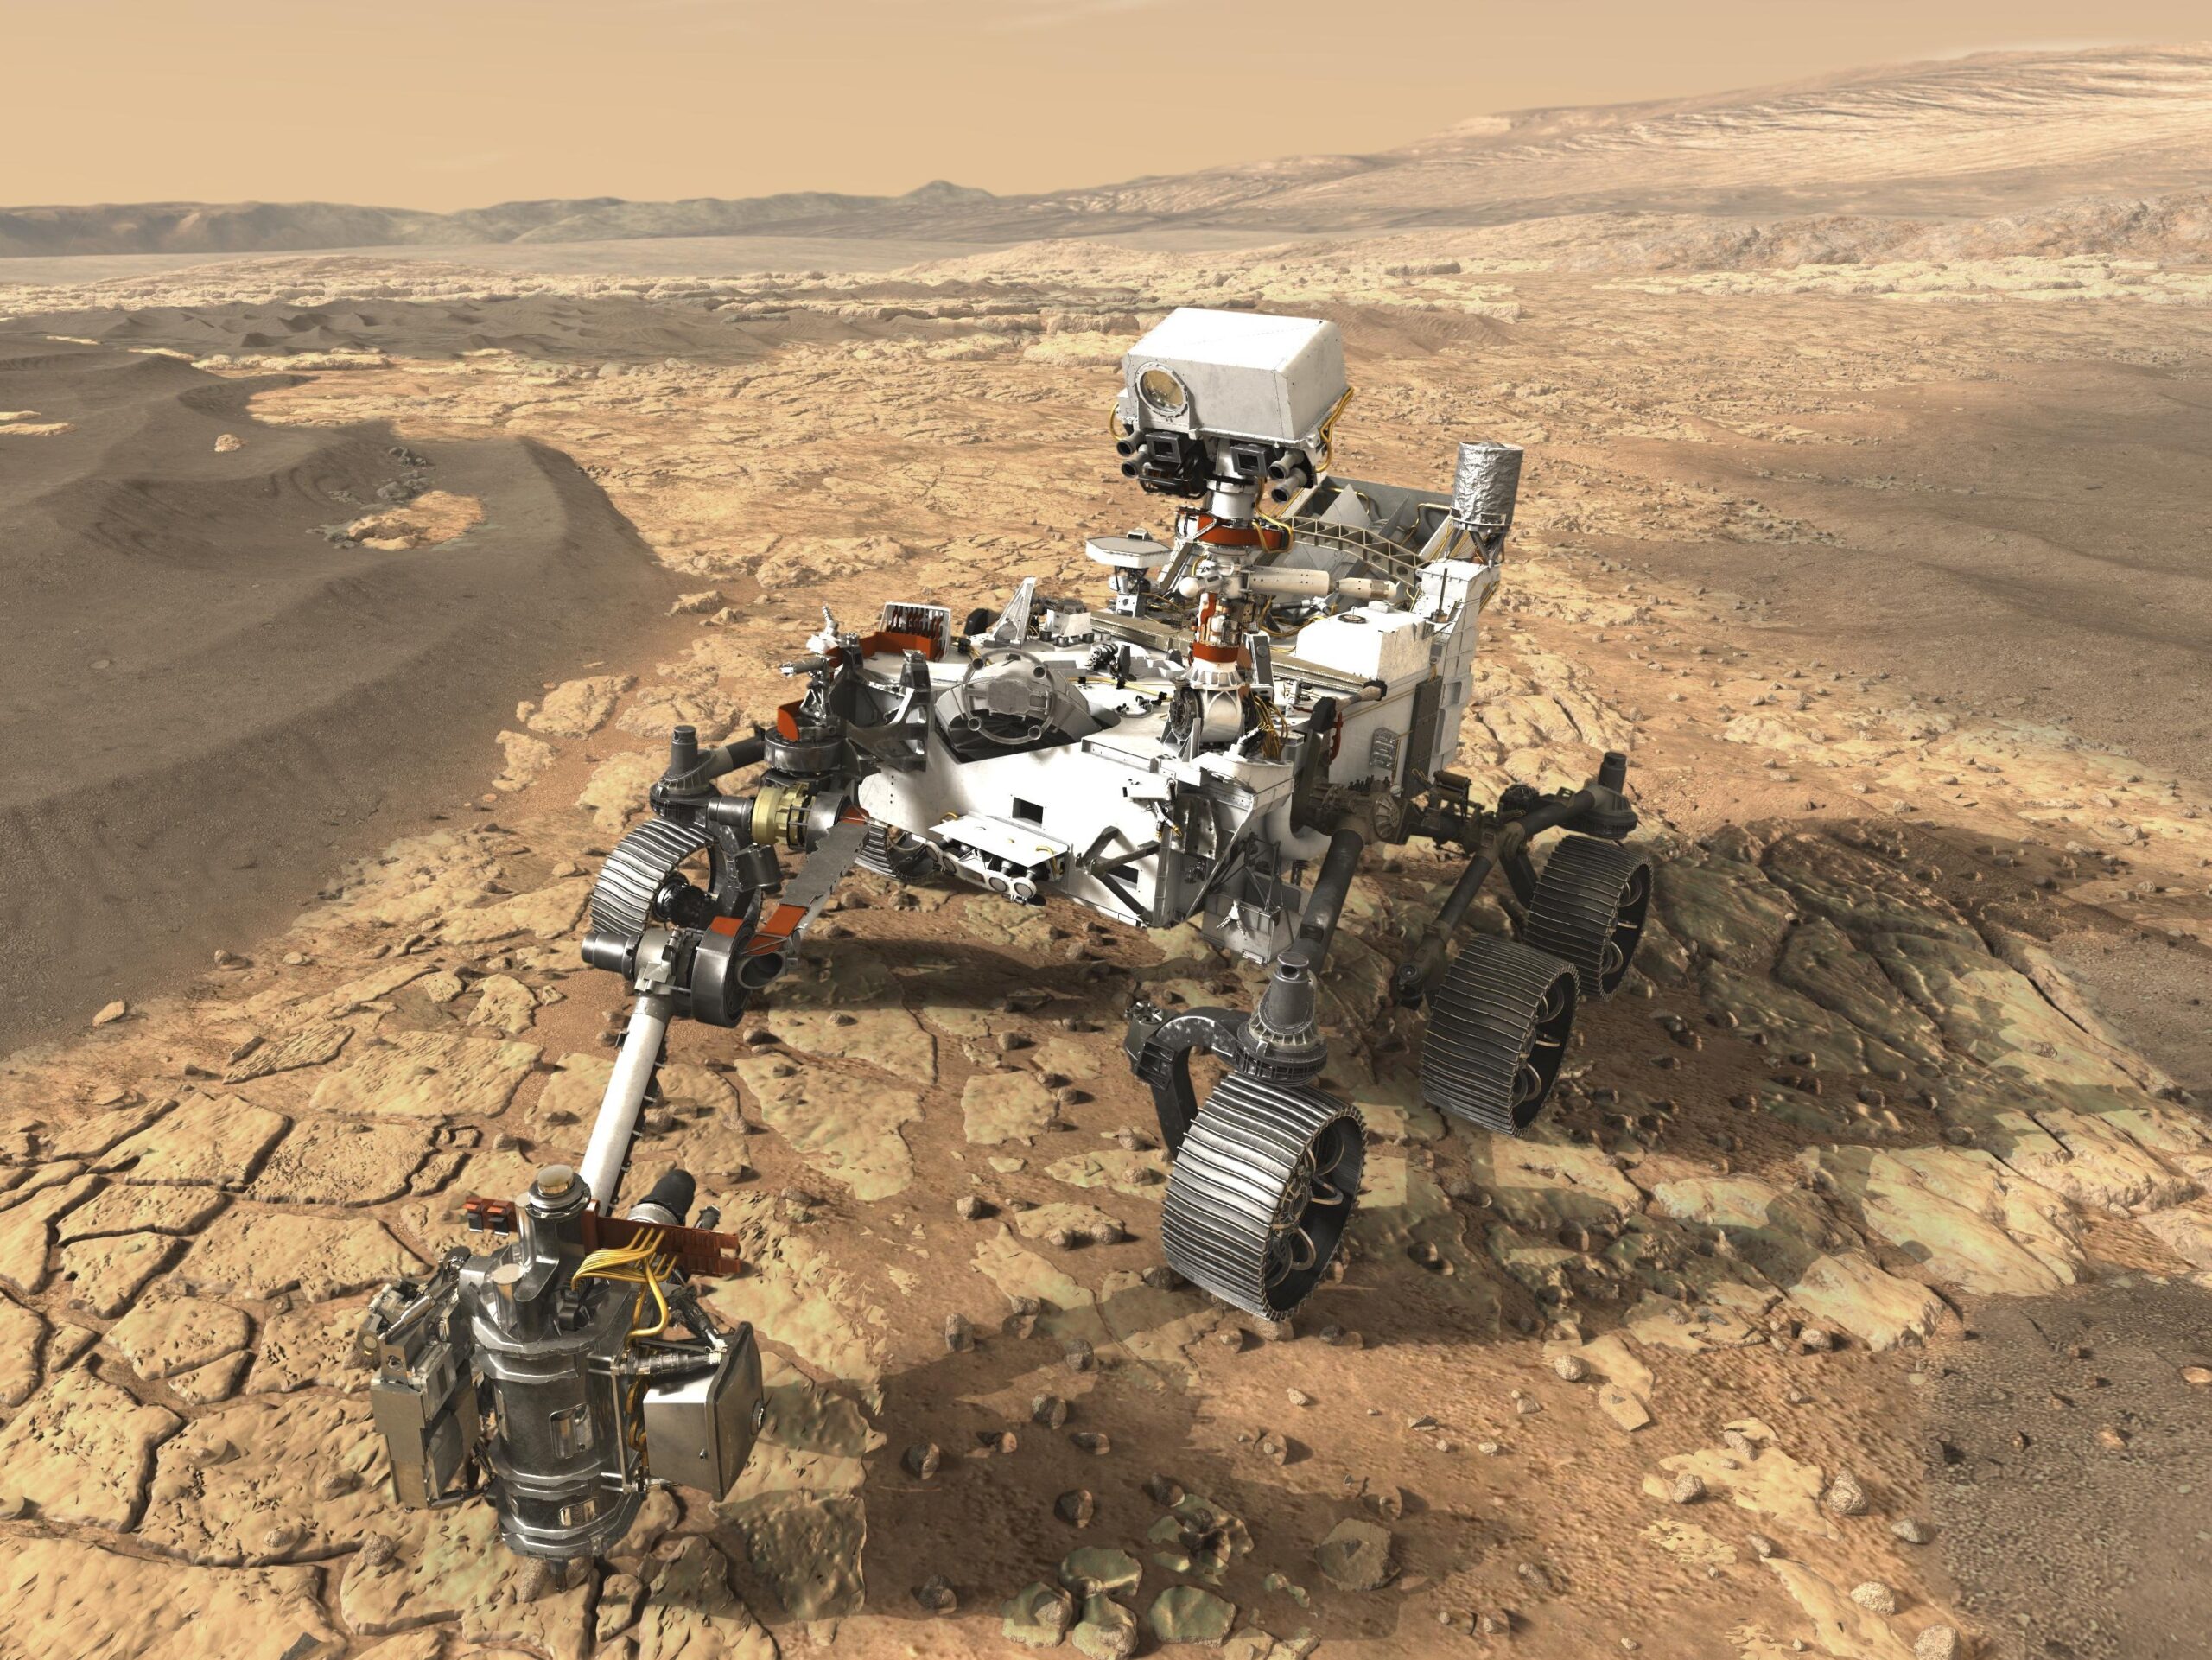 NASA's Mars 2020 Perseverance Rover has a sample caching system with hundreds of moving parts that must use solid lubricants like molybdenum disulfide (MoS2) to avoid contamination of collected samples. 